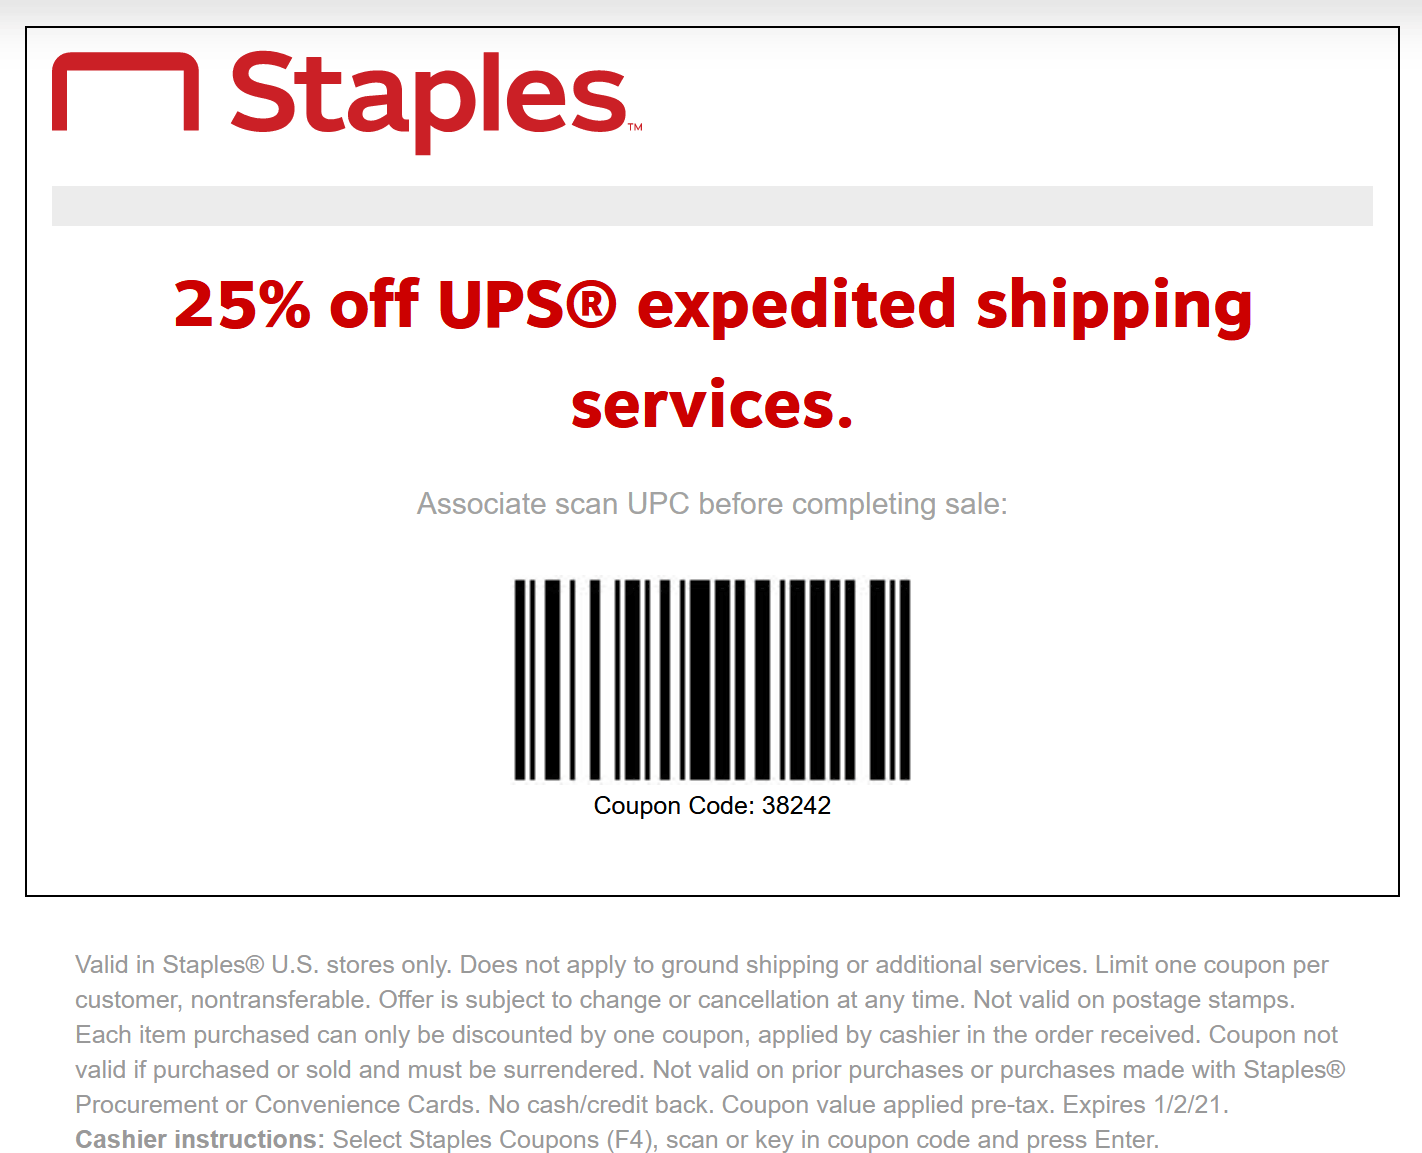 Staples stores Coupon  25% off UPS expedited shipping services at Staples #staples 